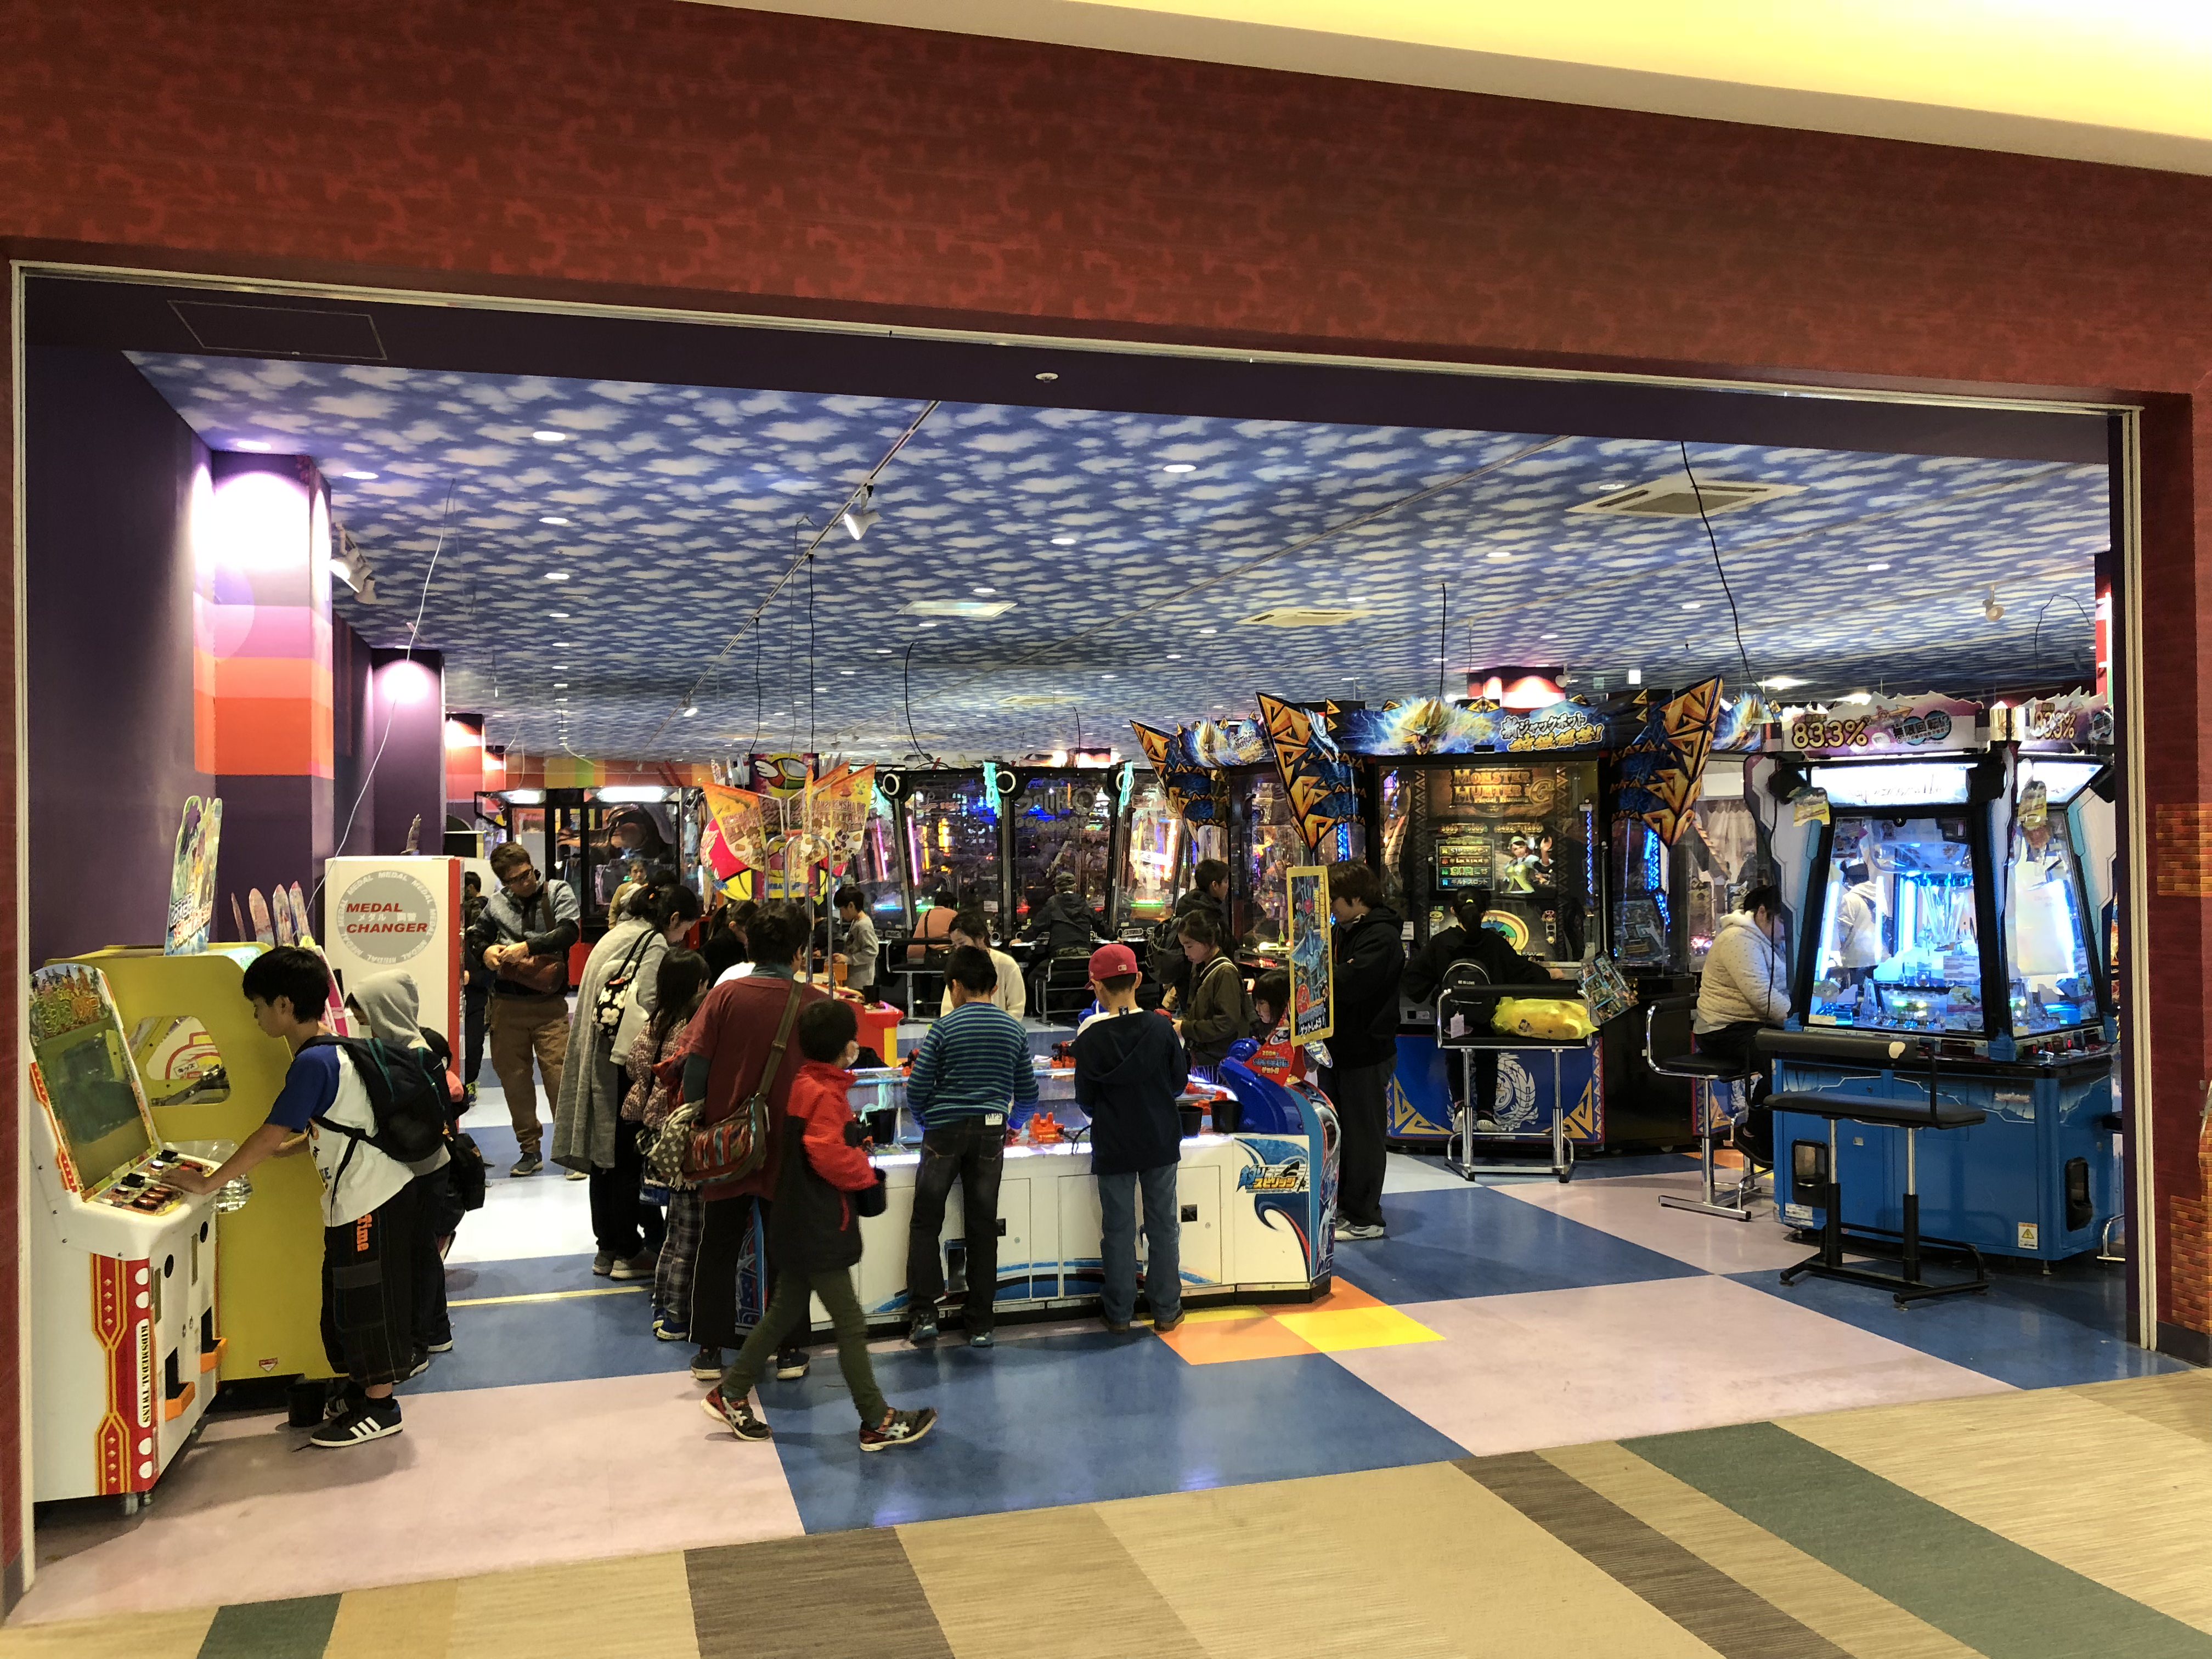 "Game centers are still a thing in Japan." You mean- Game centers are still a thing, don't you? Don't you?!?